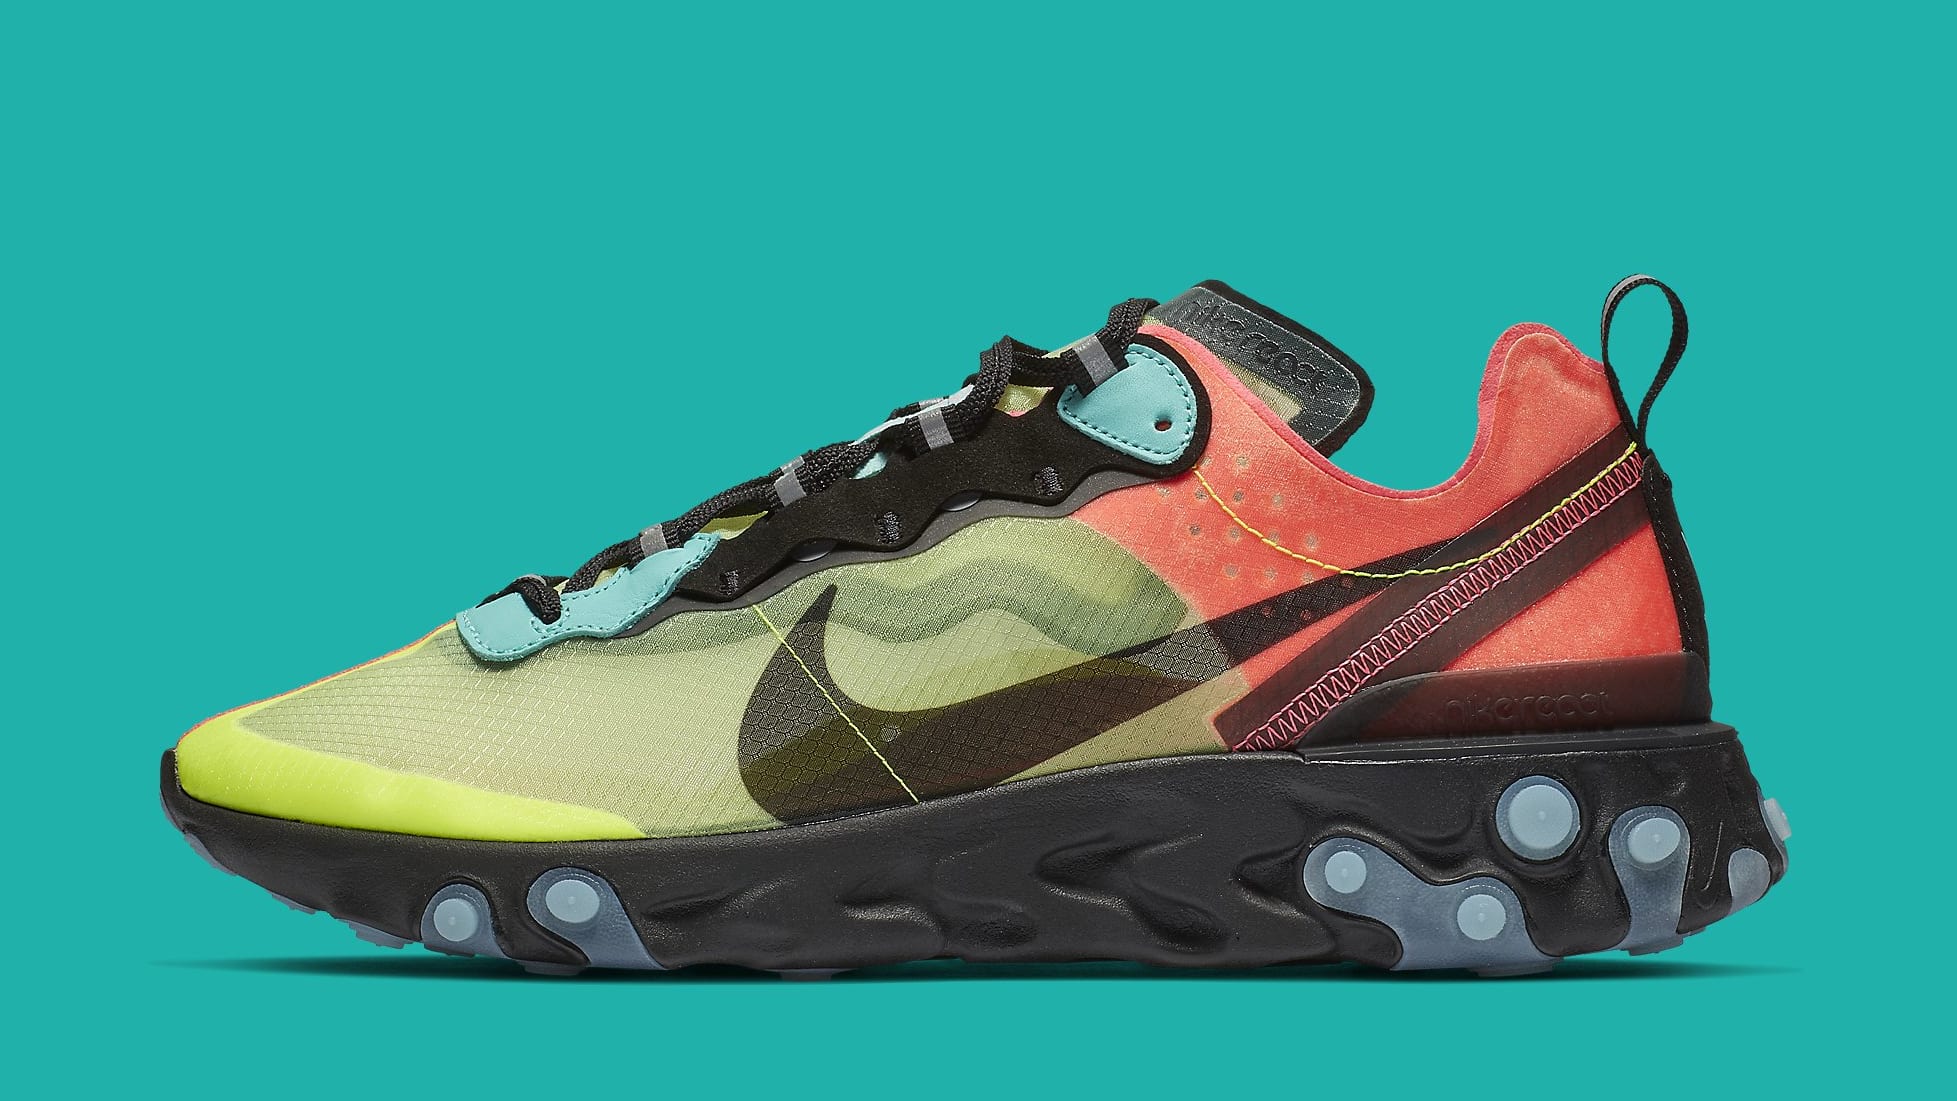 More Colorful React Element 87s on the 